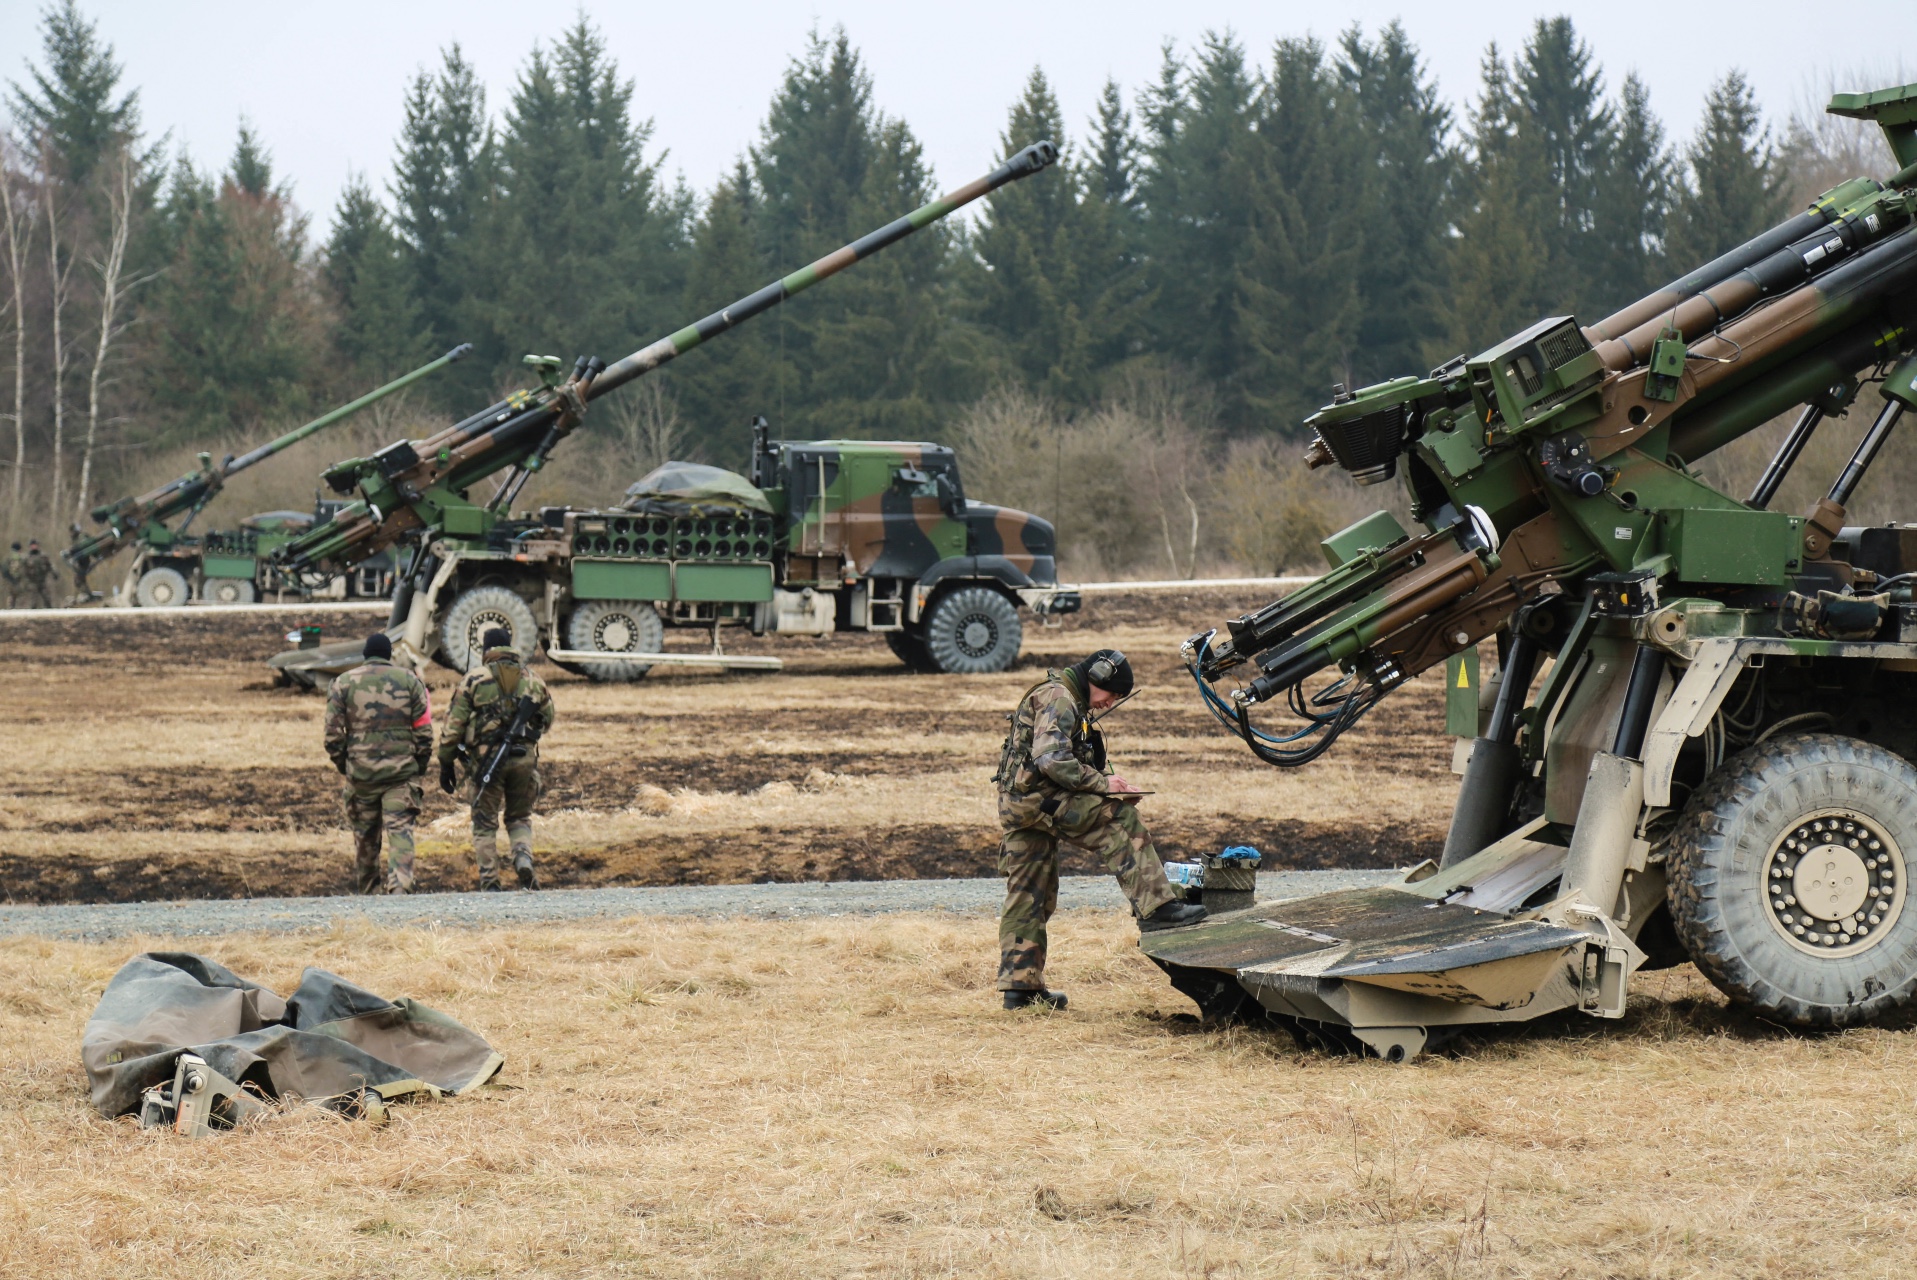 French soldiers of the 68th African Artillery Regiment prepare to fire a Caesar 155 mm, 52 caliber wheeled gun during Exercise Dynamic Front 18 at the 7th Army Training Command in Grafenwoehr, Germany